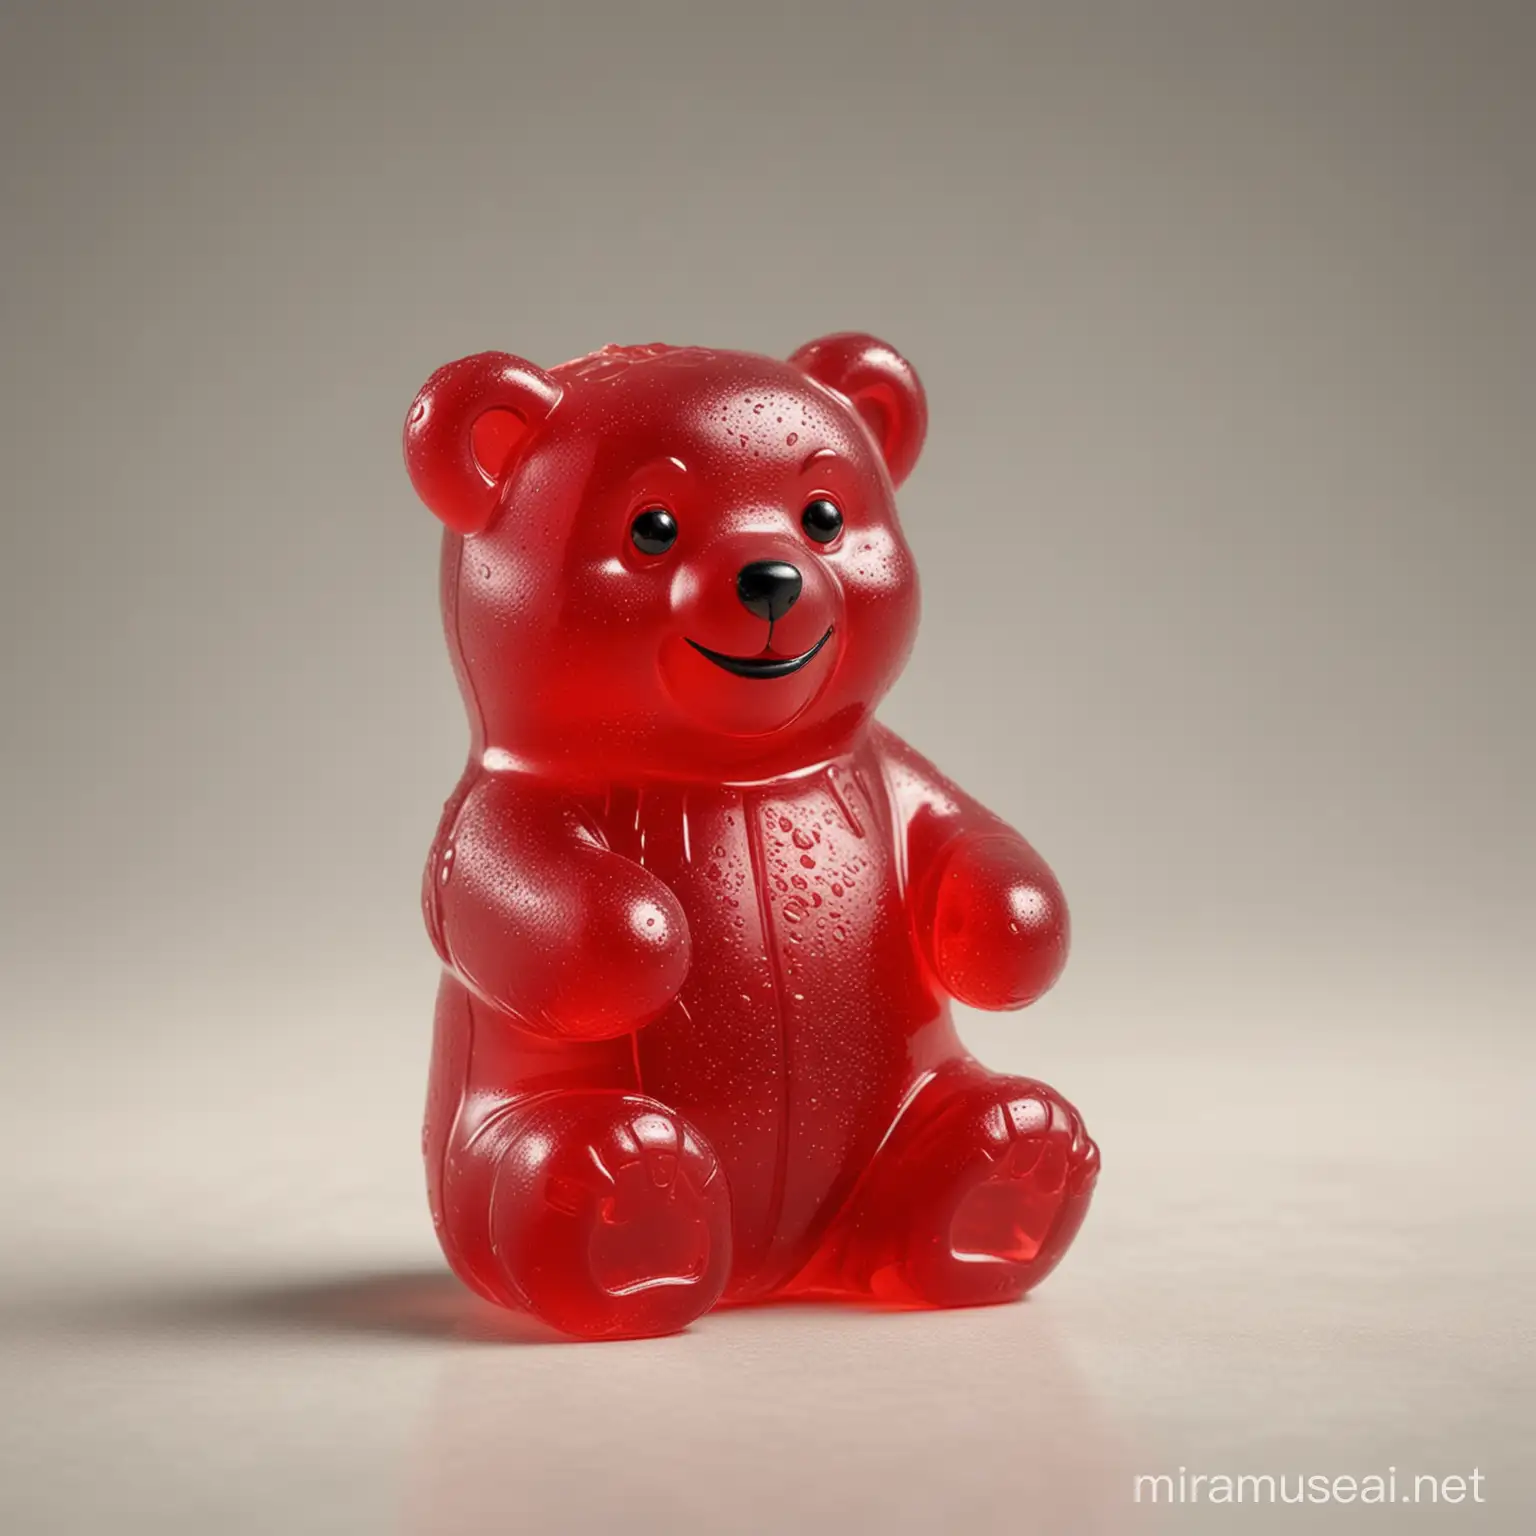 4k Funny red gummy bear meme with a neutral background